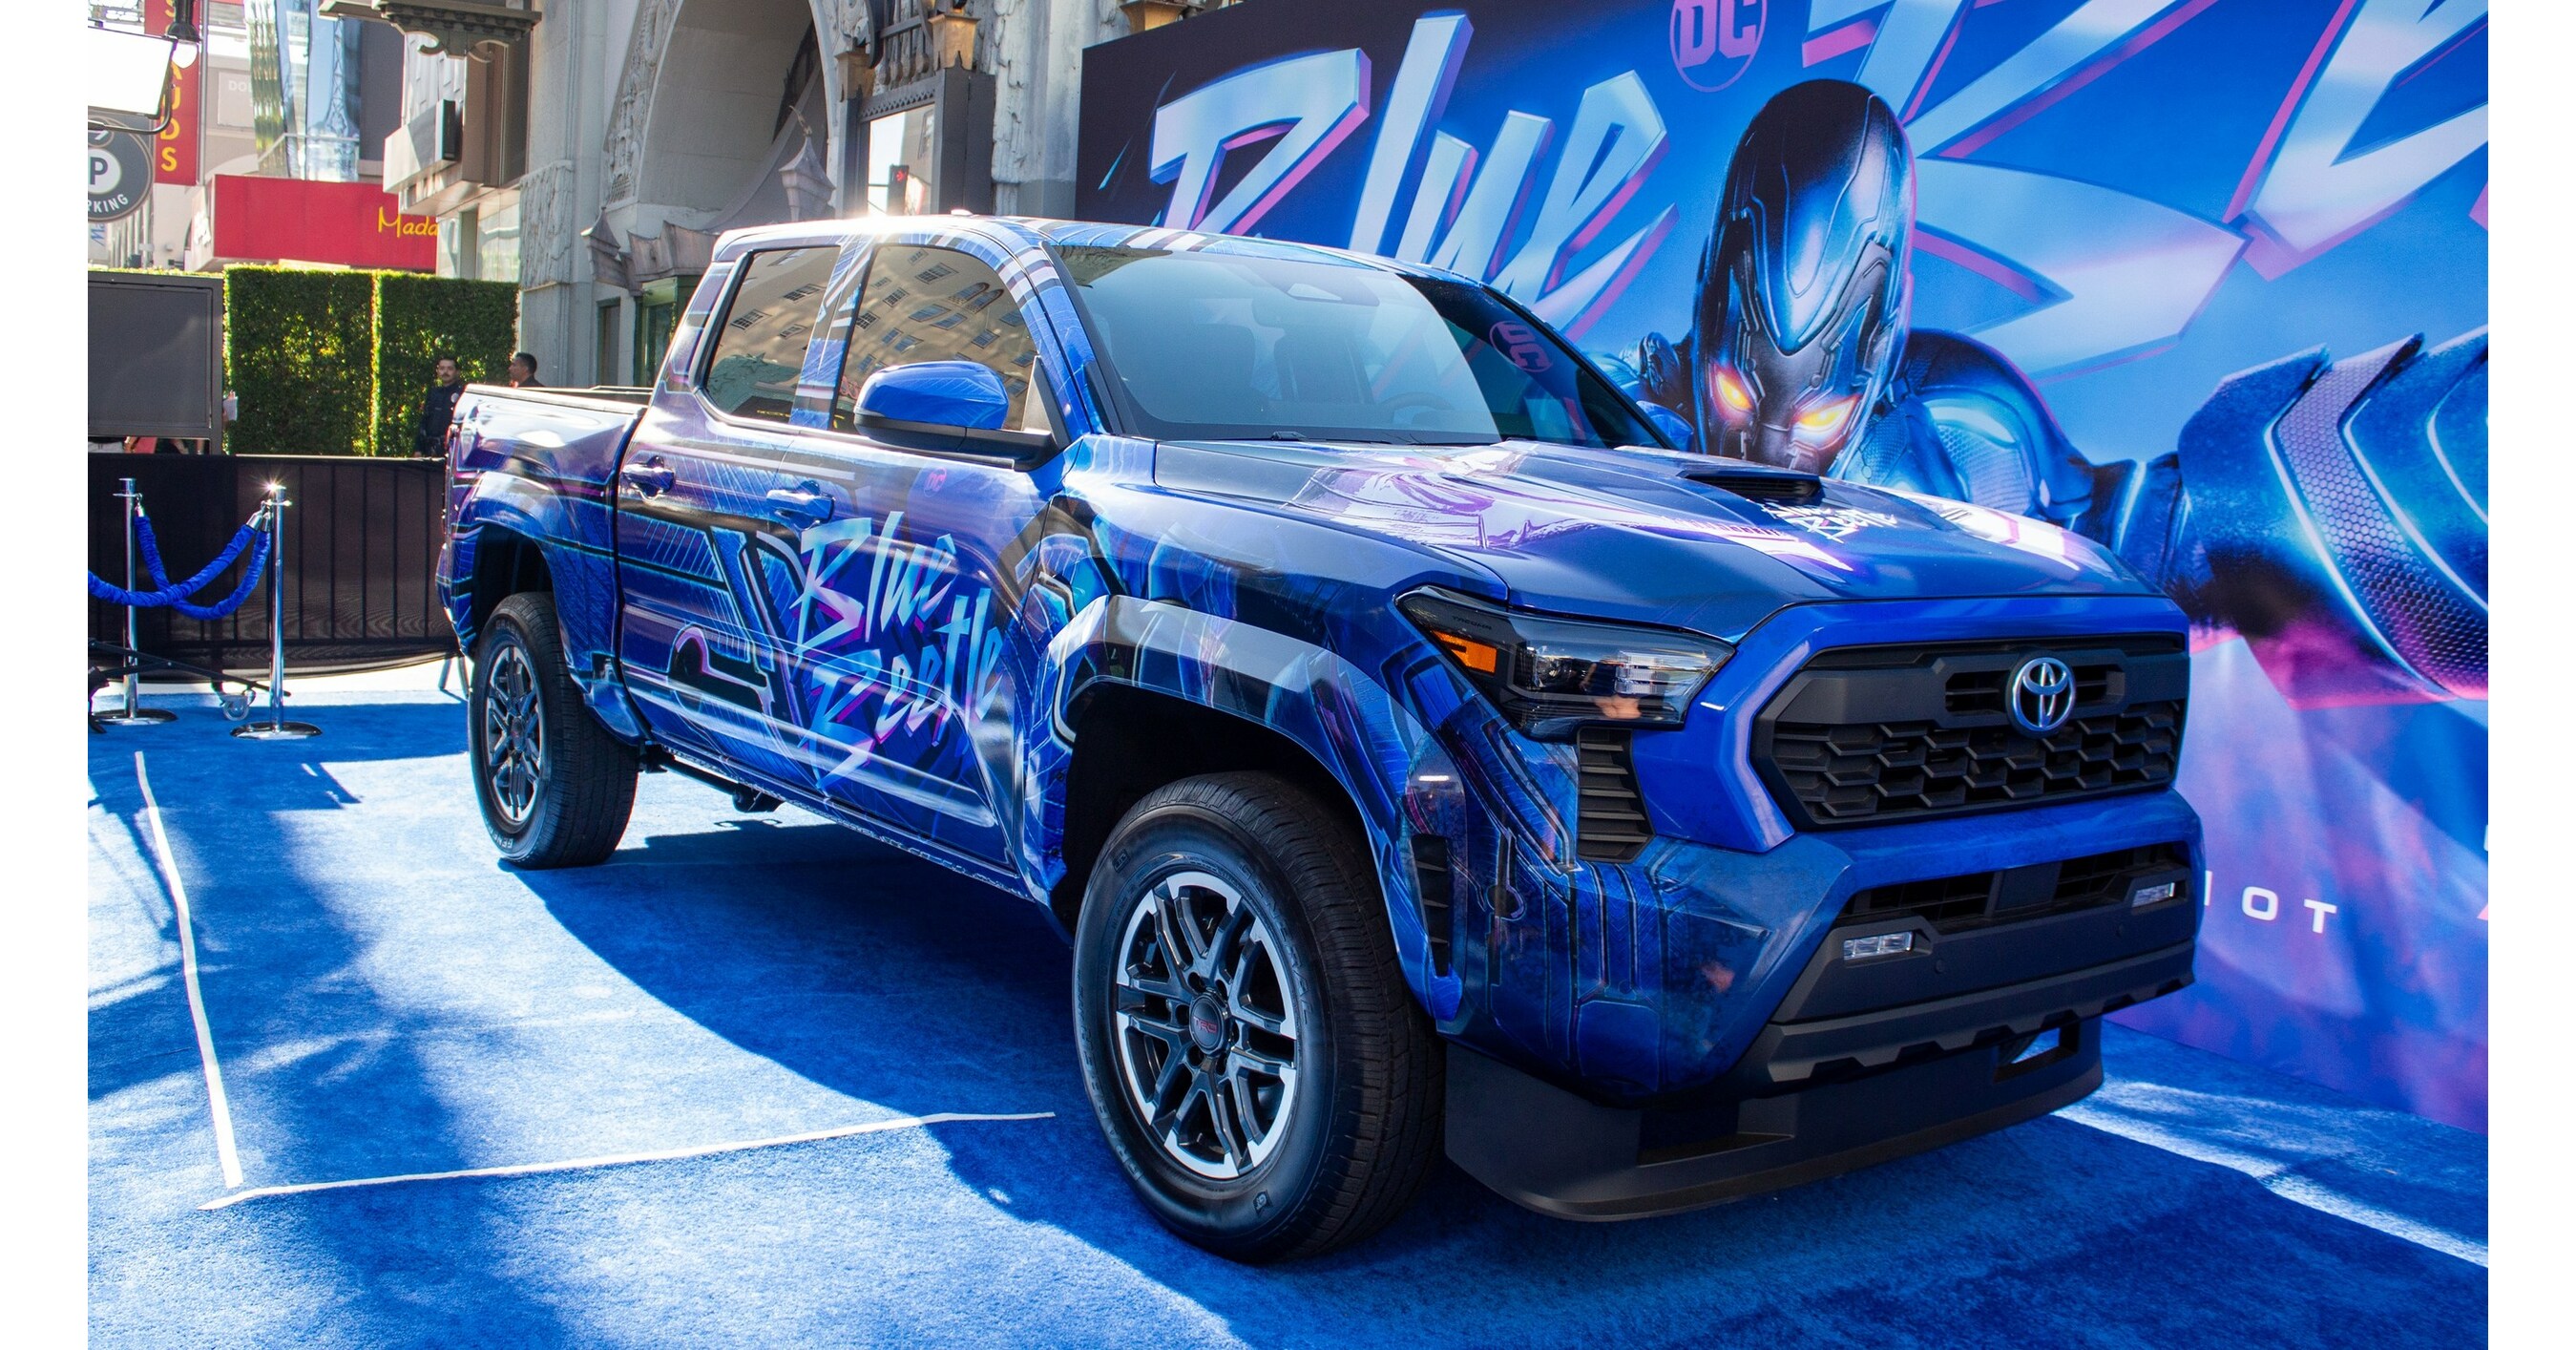 The AllNew 2024 Toyota Makes Big Screen Debut in "Blue Beetle